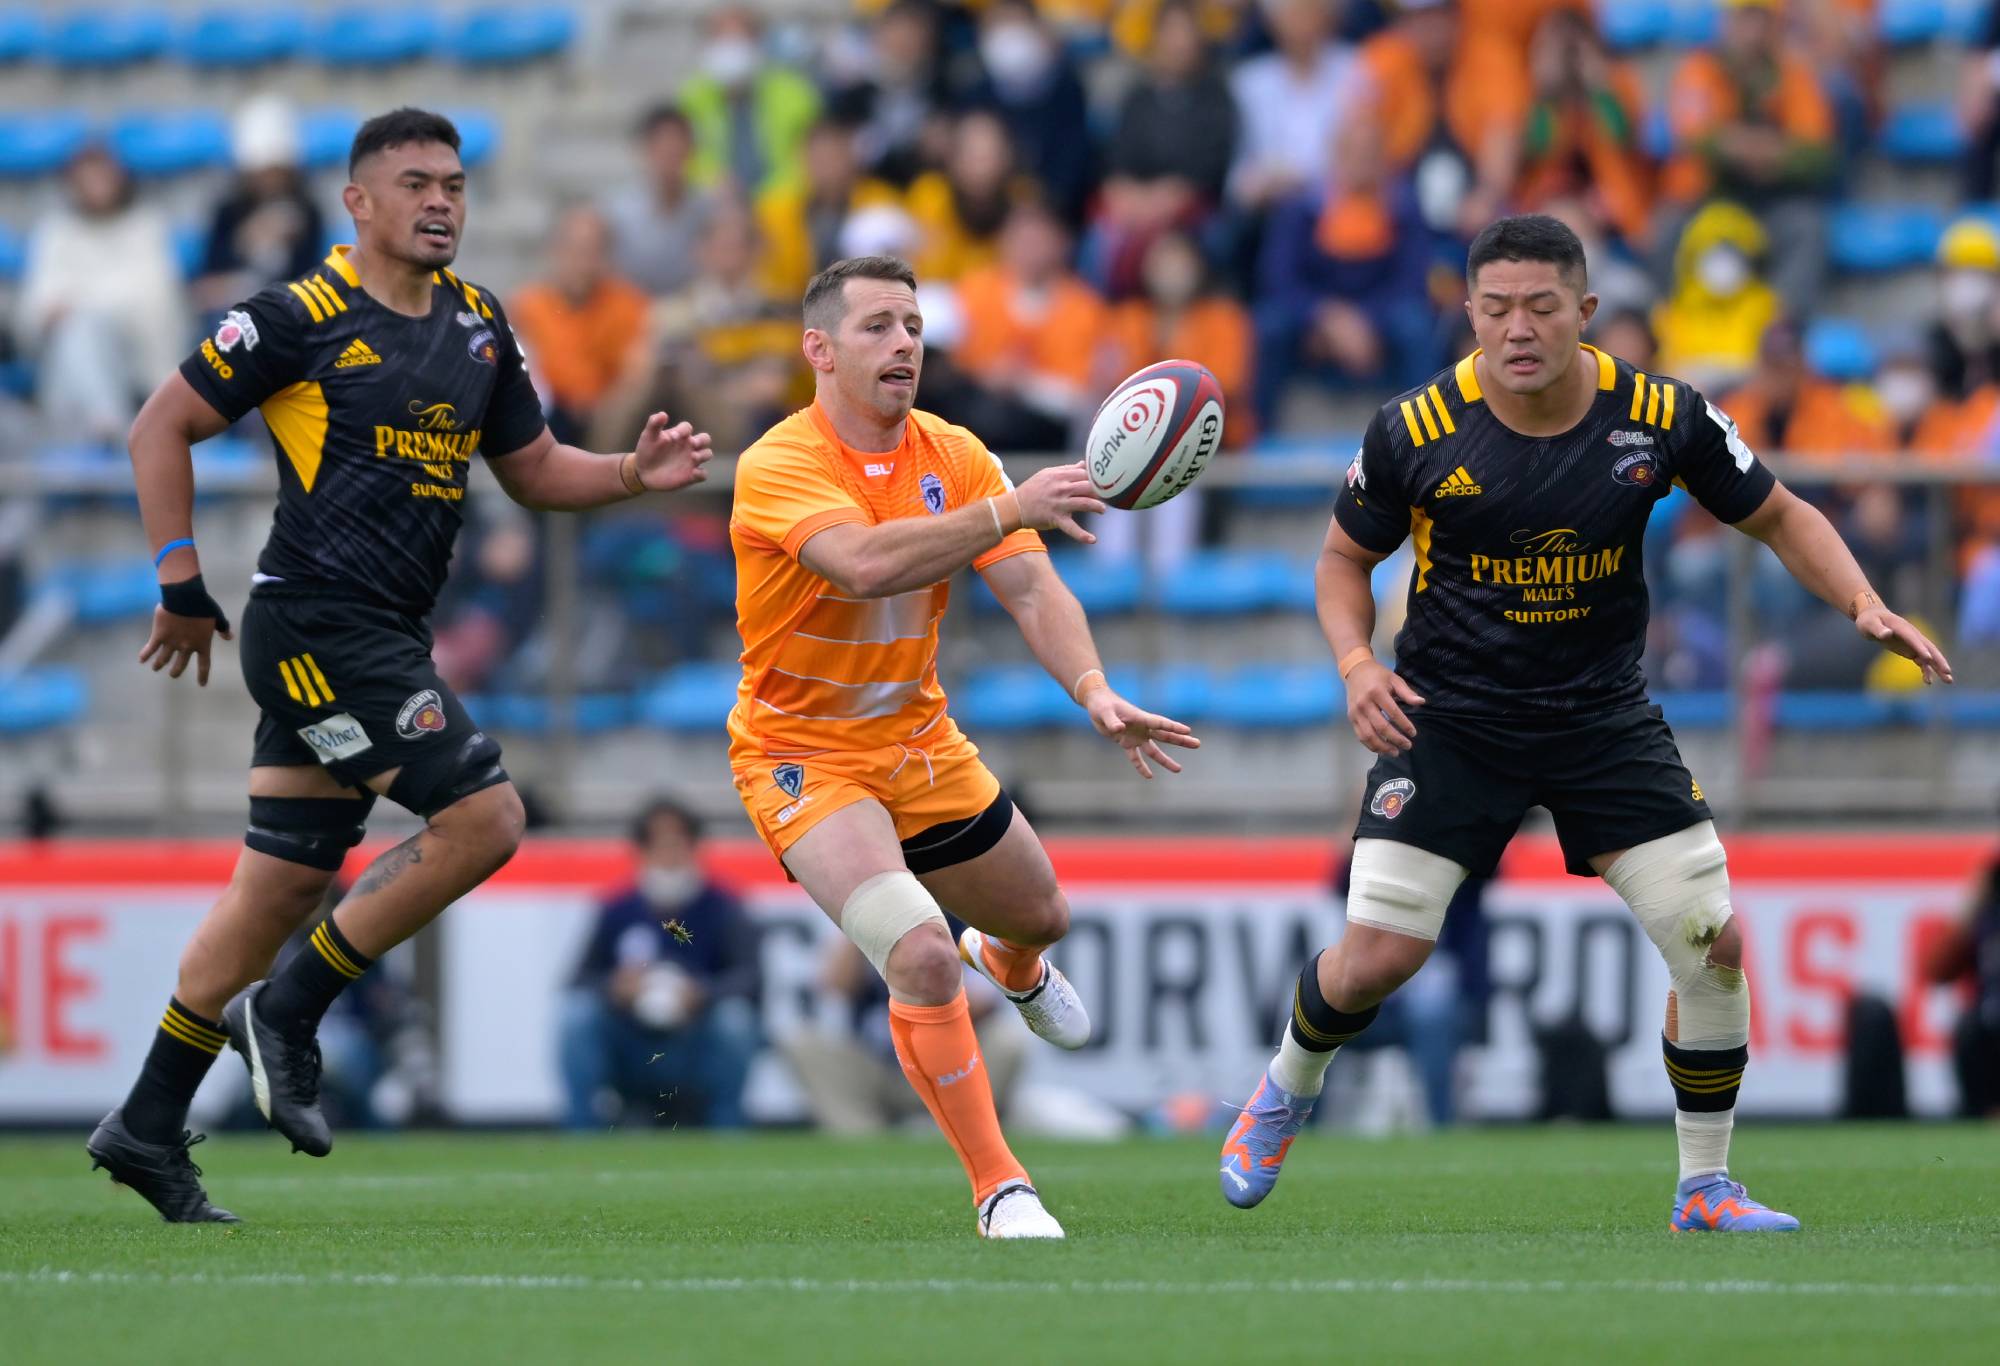 Bernard Foley of Kubota Spears passes the ball during the Rugby League One playoff semi final between Kubota Spears Funabashi Tokyo Bay and Tokyo Suntory Sungoliath at Prince Chichibu Memorial Ground on May 14, 2023 in Tokyo, Japan. (Photo by Koki Nagahama/Getty Images)